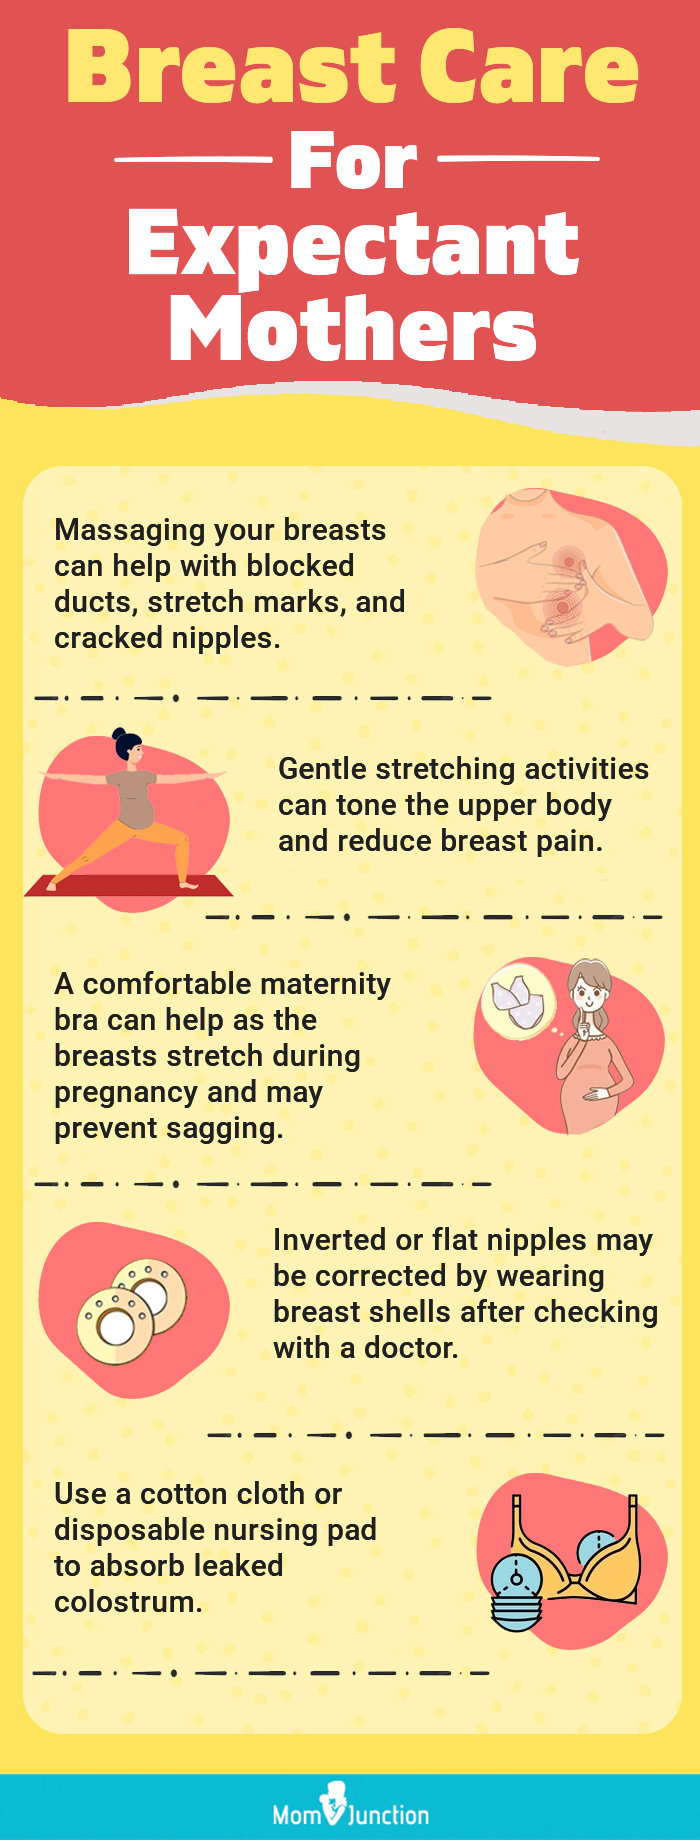 10 Tips for Nipple & Breast Care